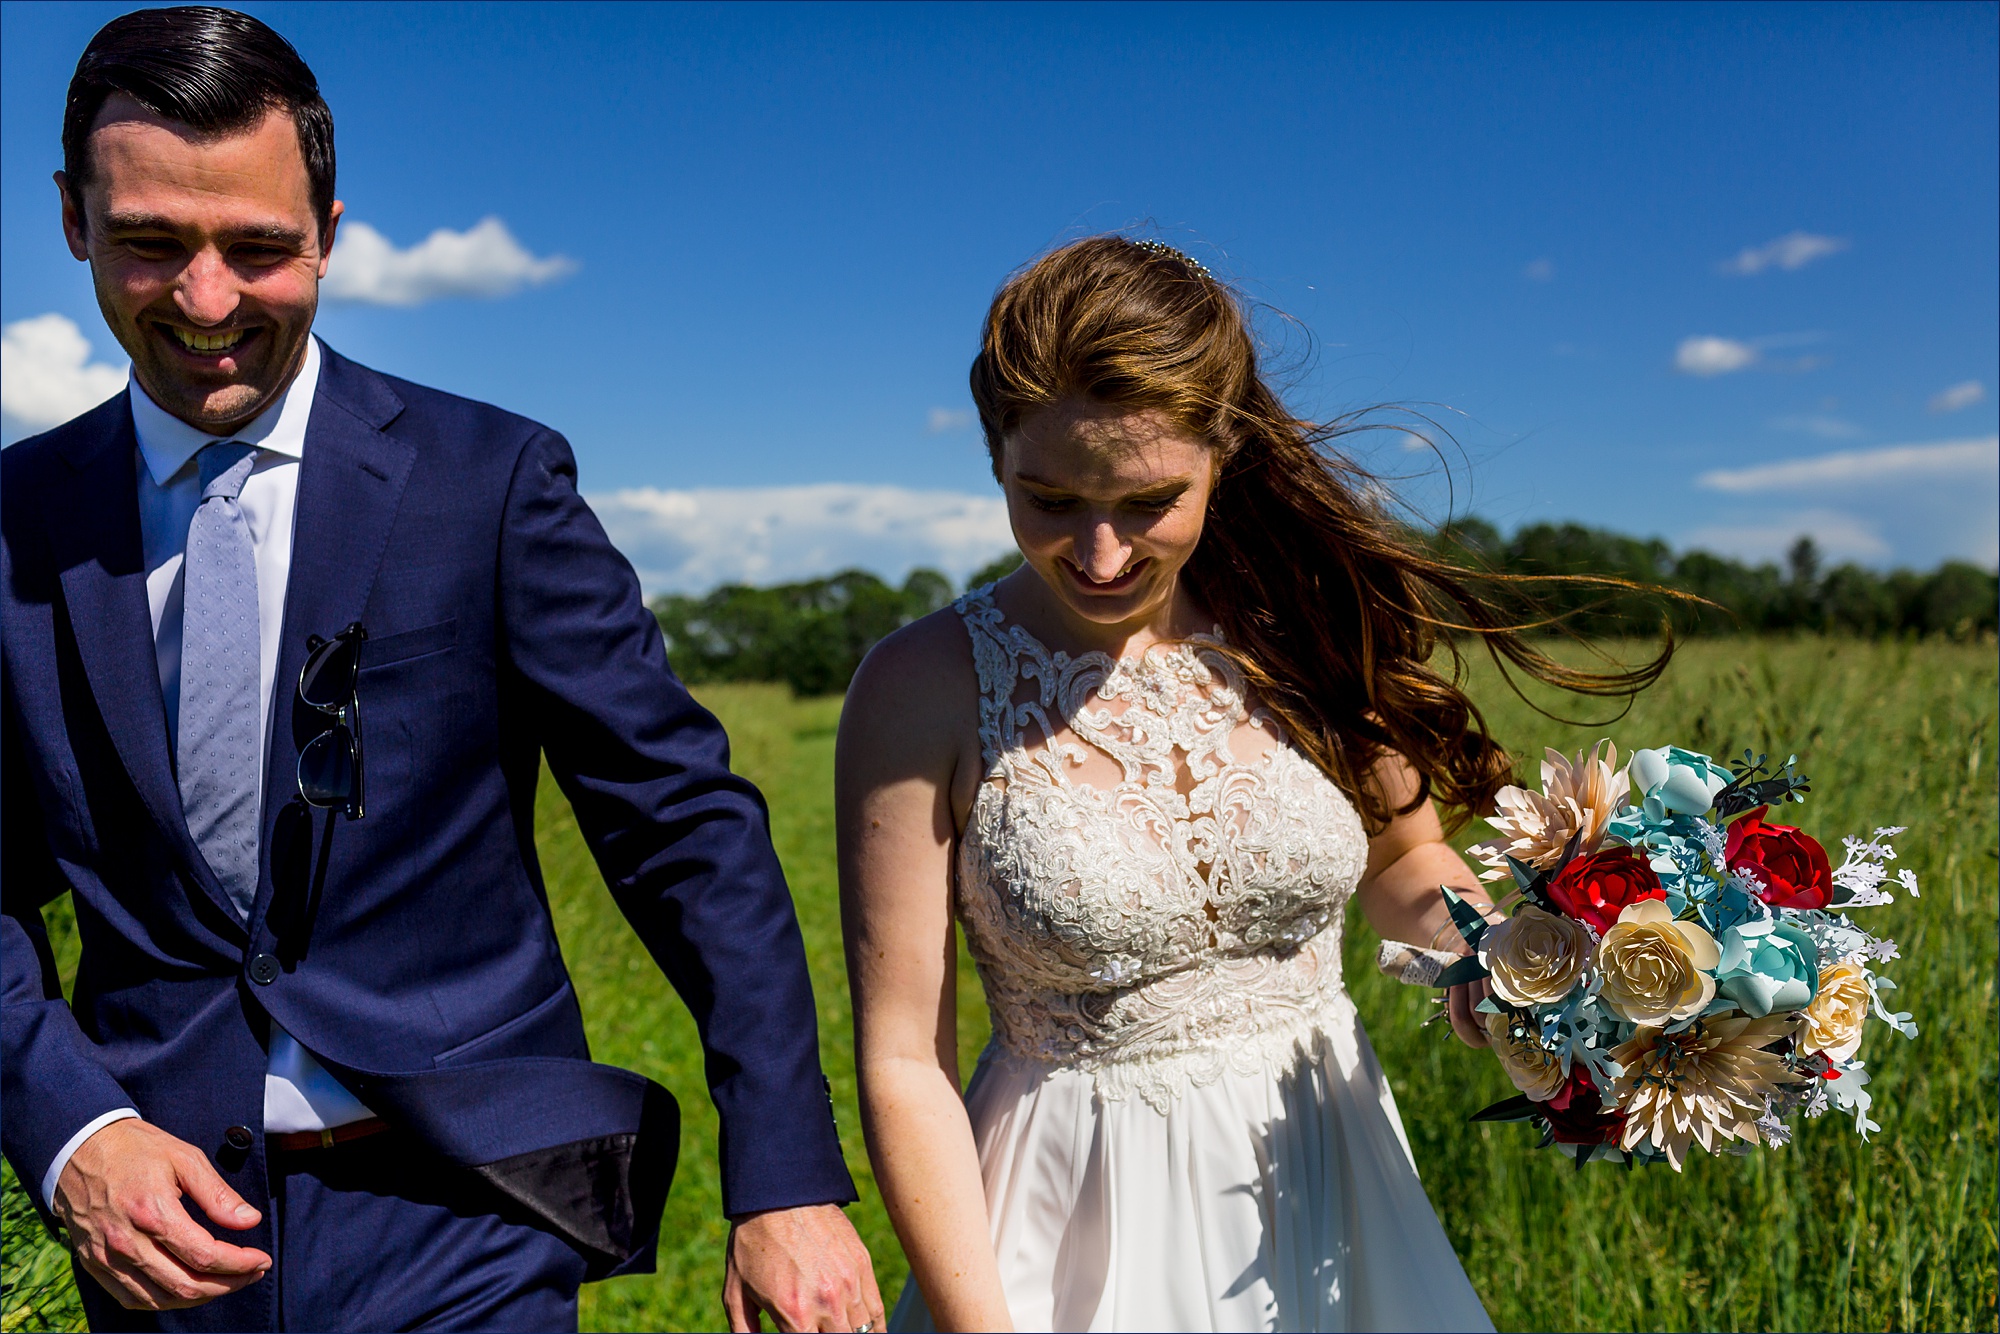 The bride and groom run and laugh after their wedding in a field with a view of the White Mountains